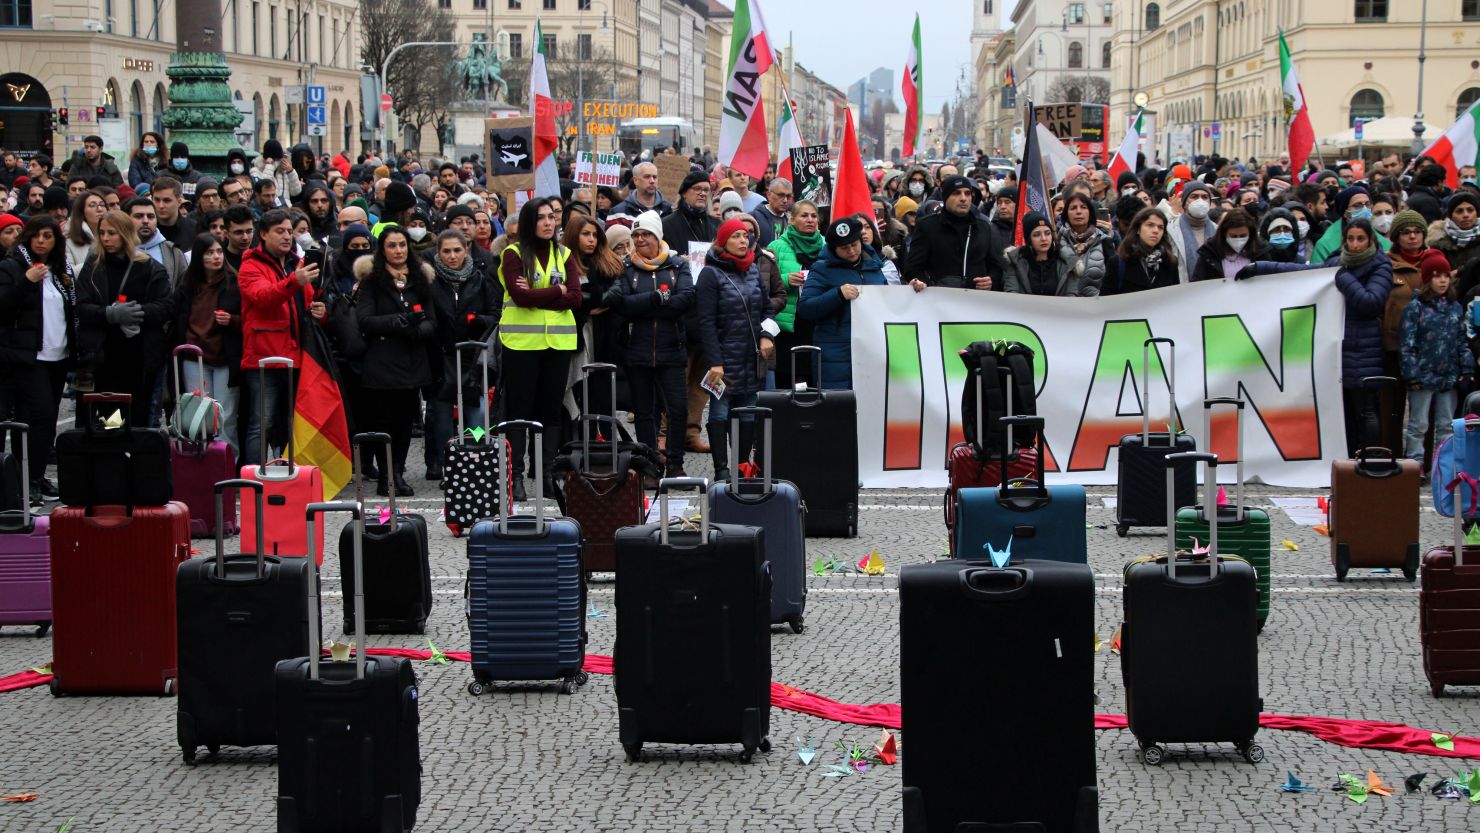 Protests in support of the victims and their families took place around the globe to mark the third anniversary of the tragedy, including in Munich, Germany, pictured here.